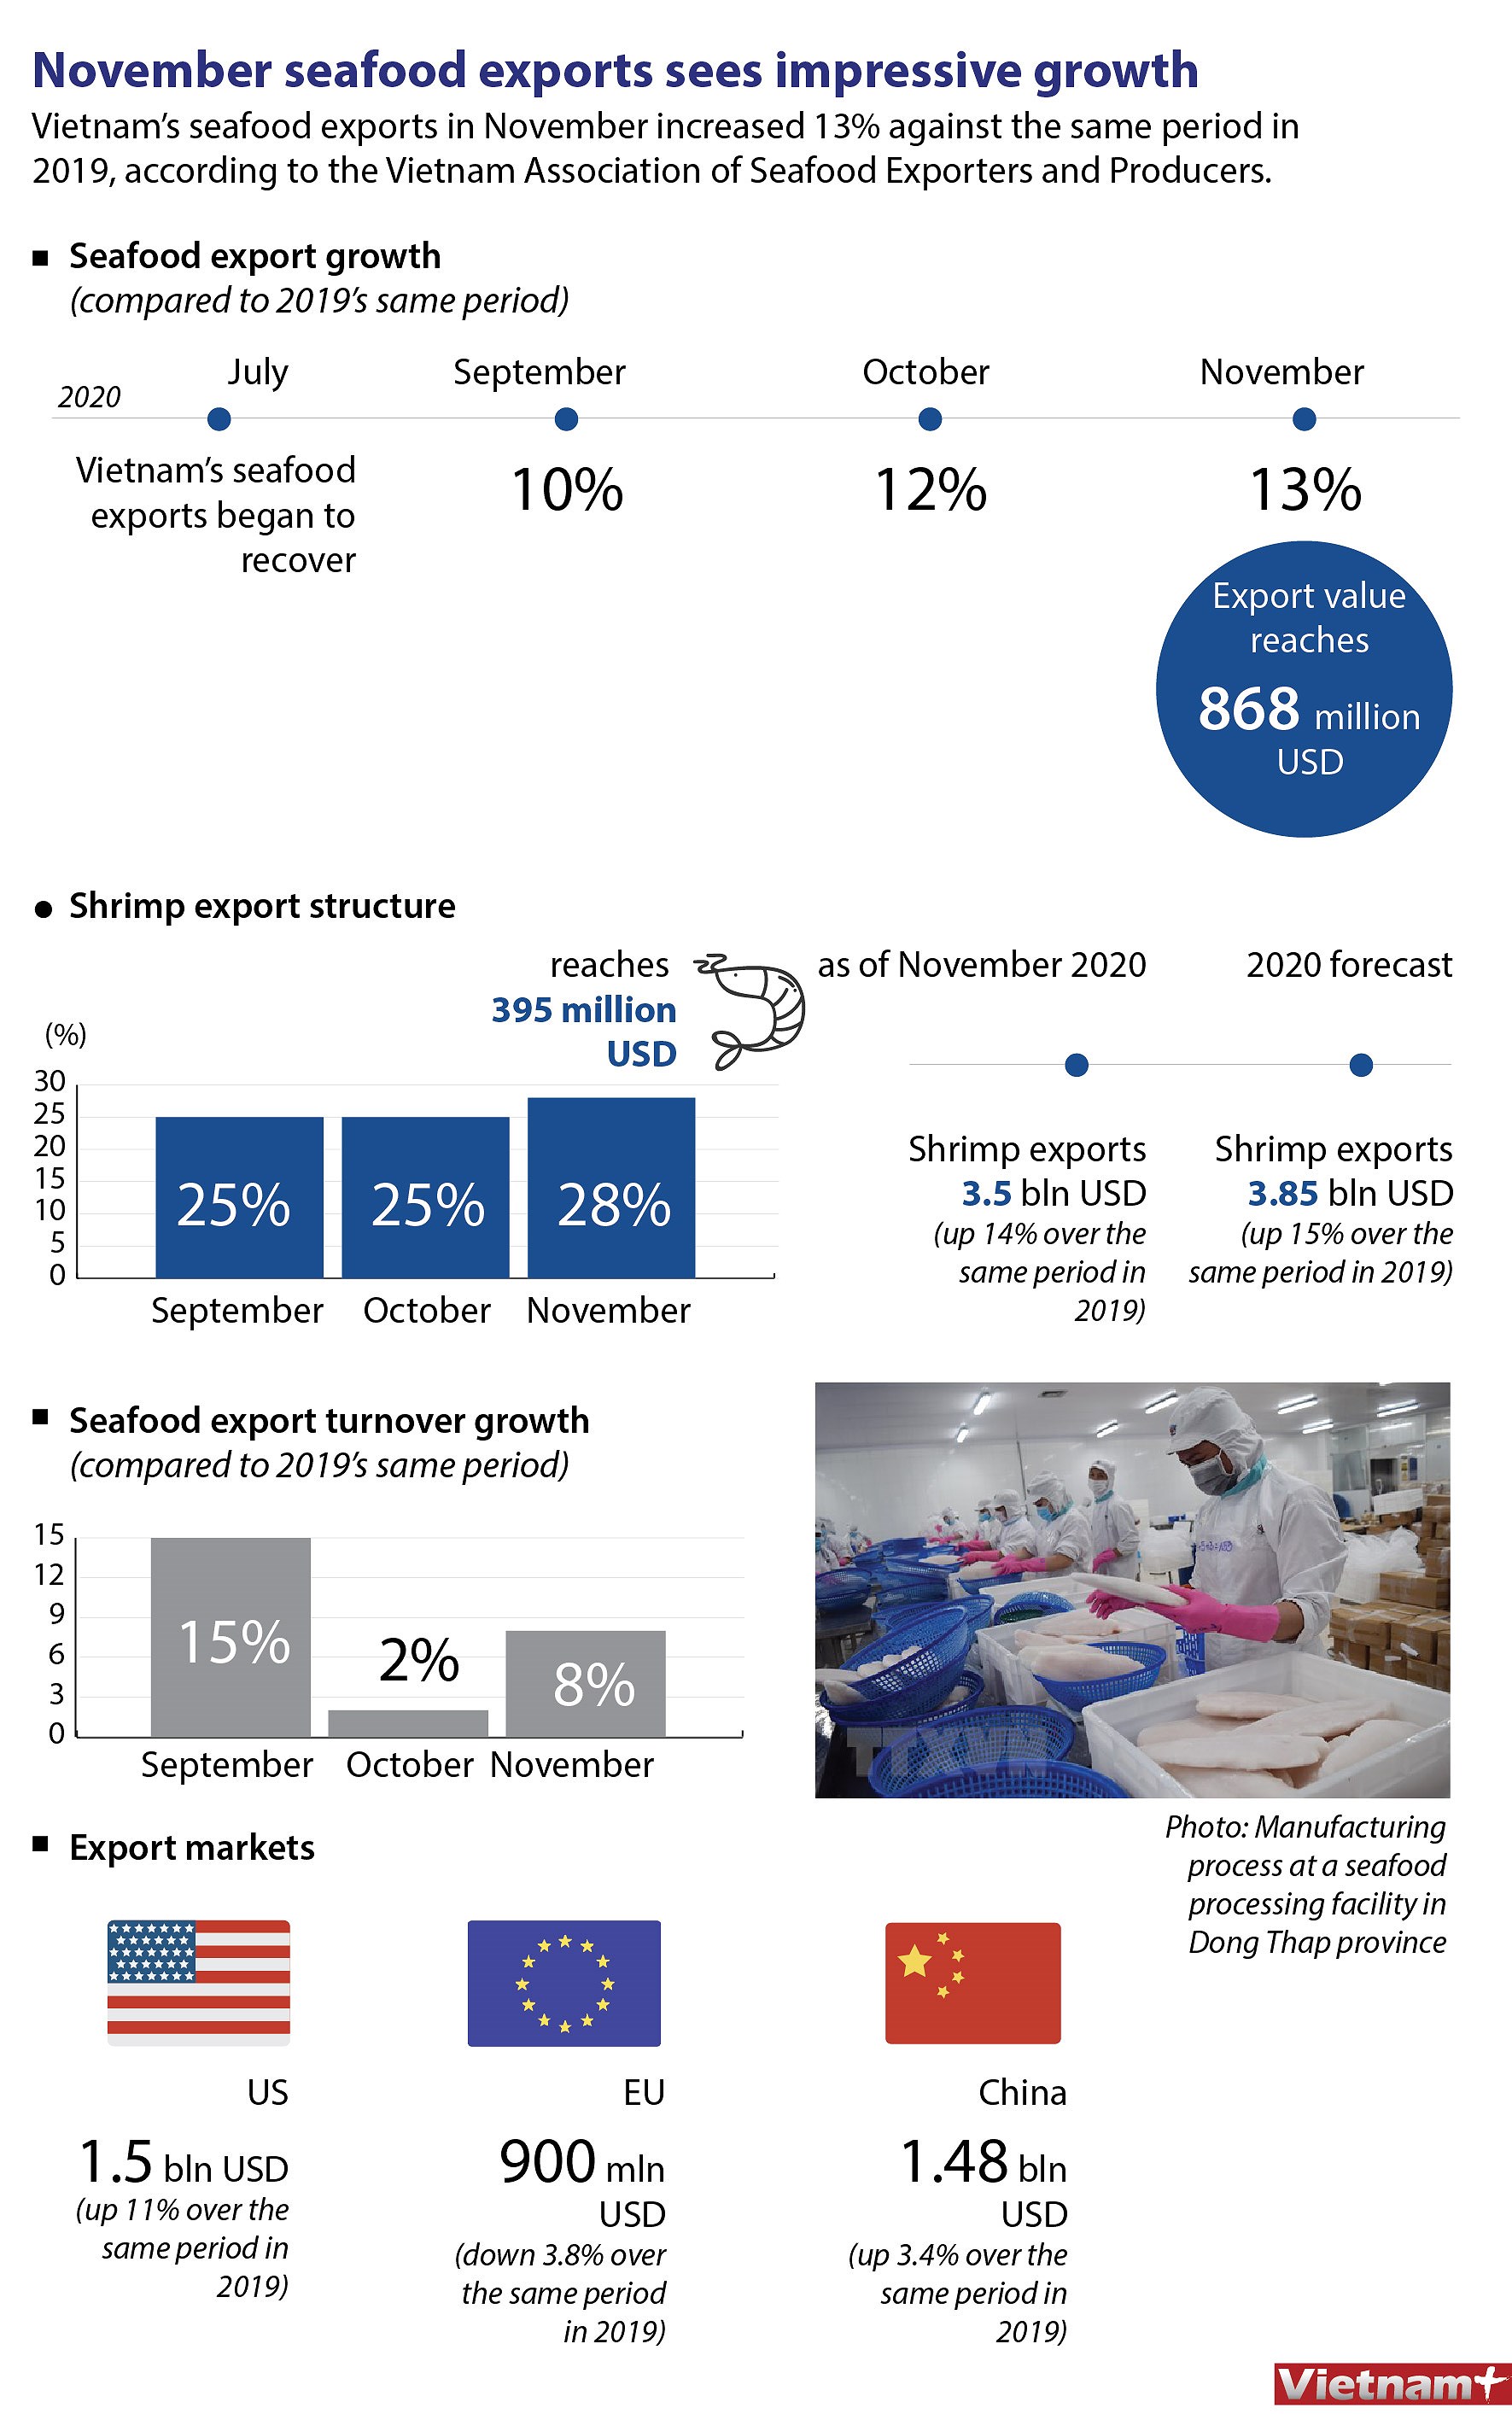 November seafood exports sees impressive growth hinh anh 1